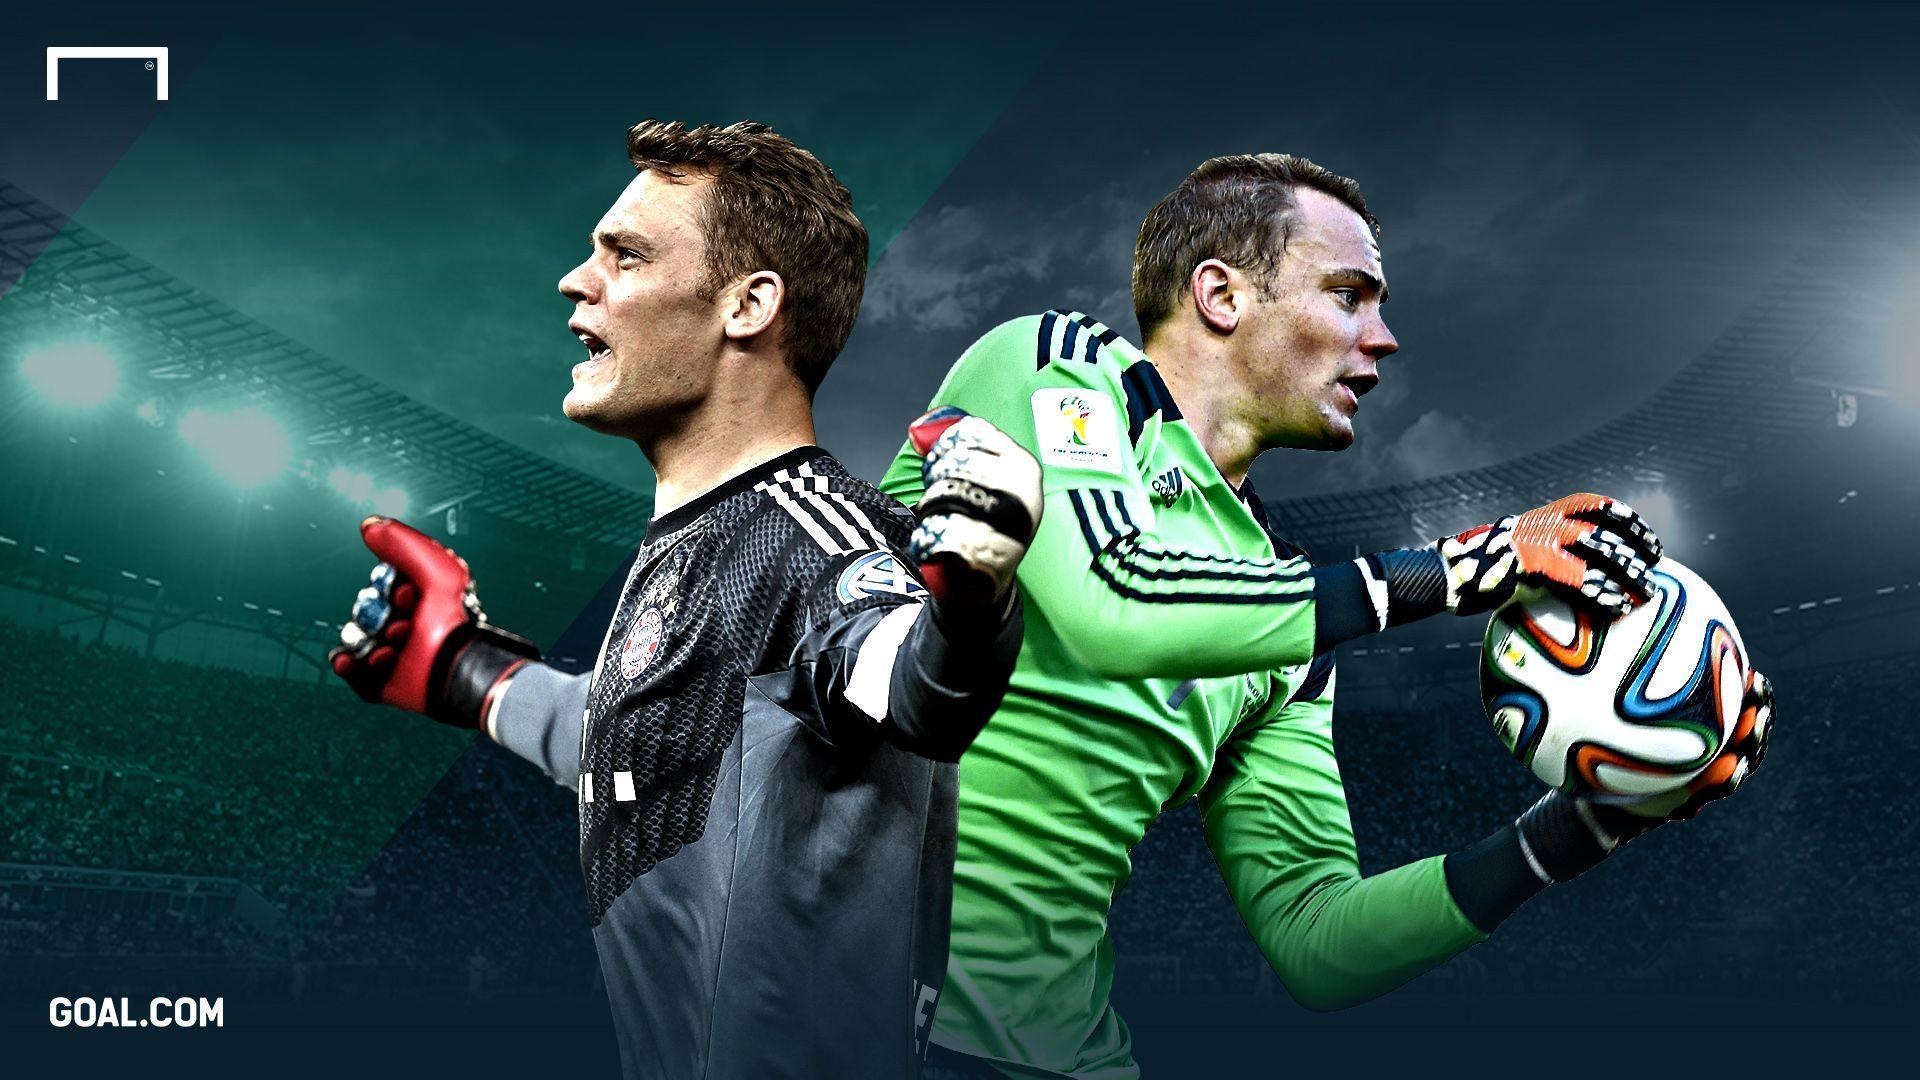 Manuel Neuer: The story of 2014